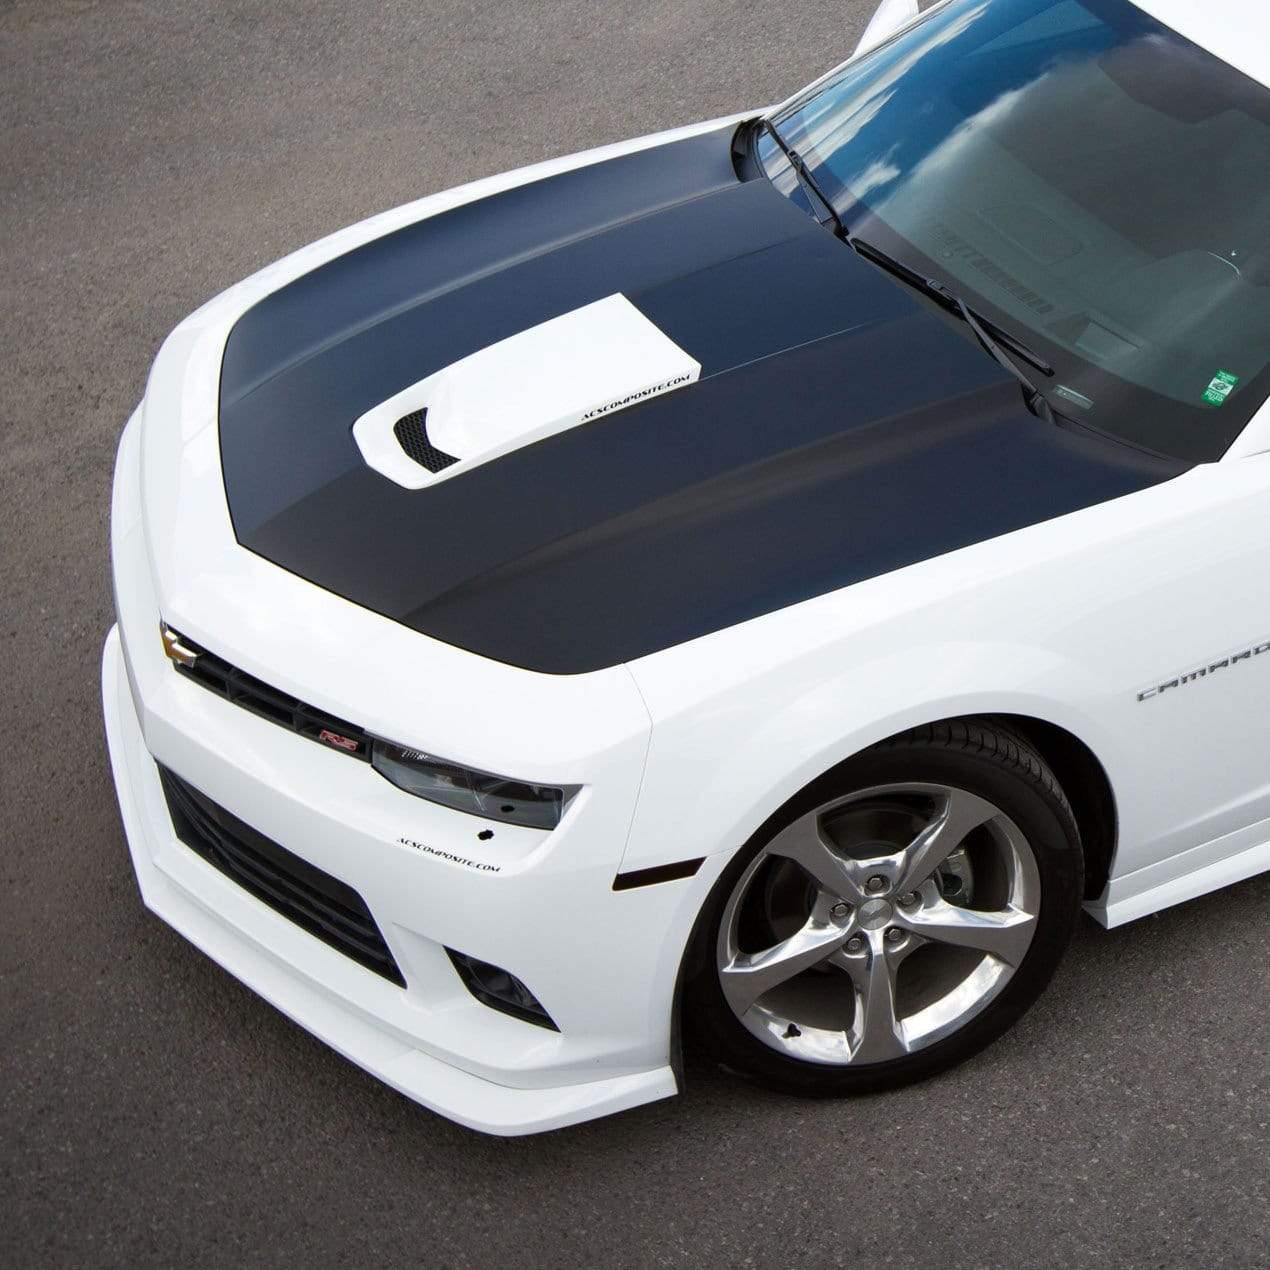 ACS Composite TLE Hood Insert in Carbon Flash Black [46-4-011]GBA for 2014-2015 Camaro SS by ACS Composite.